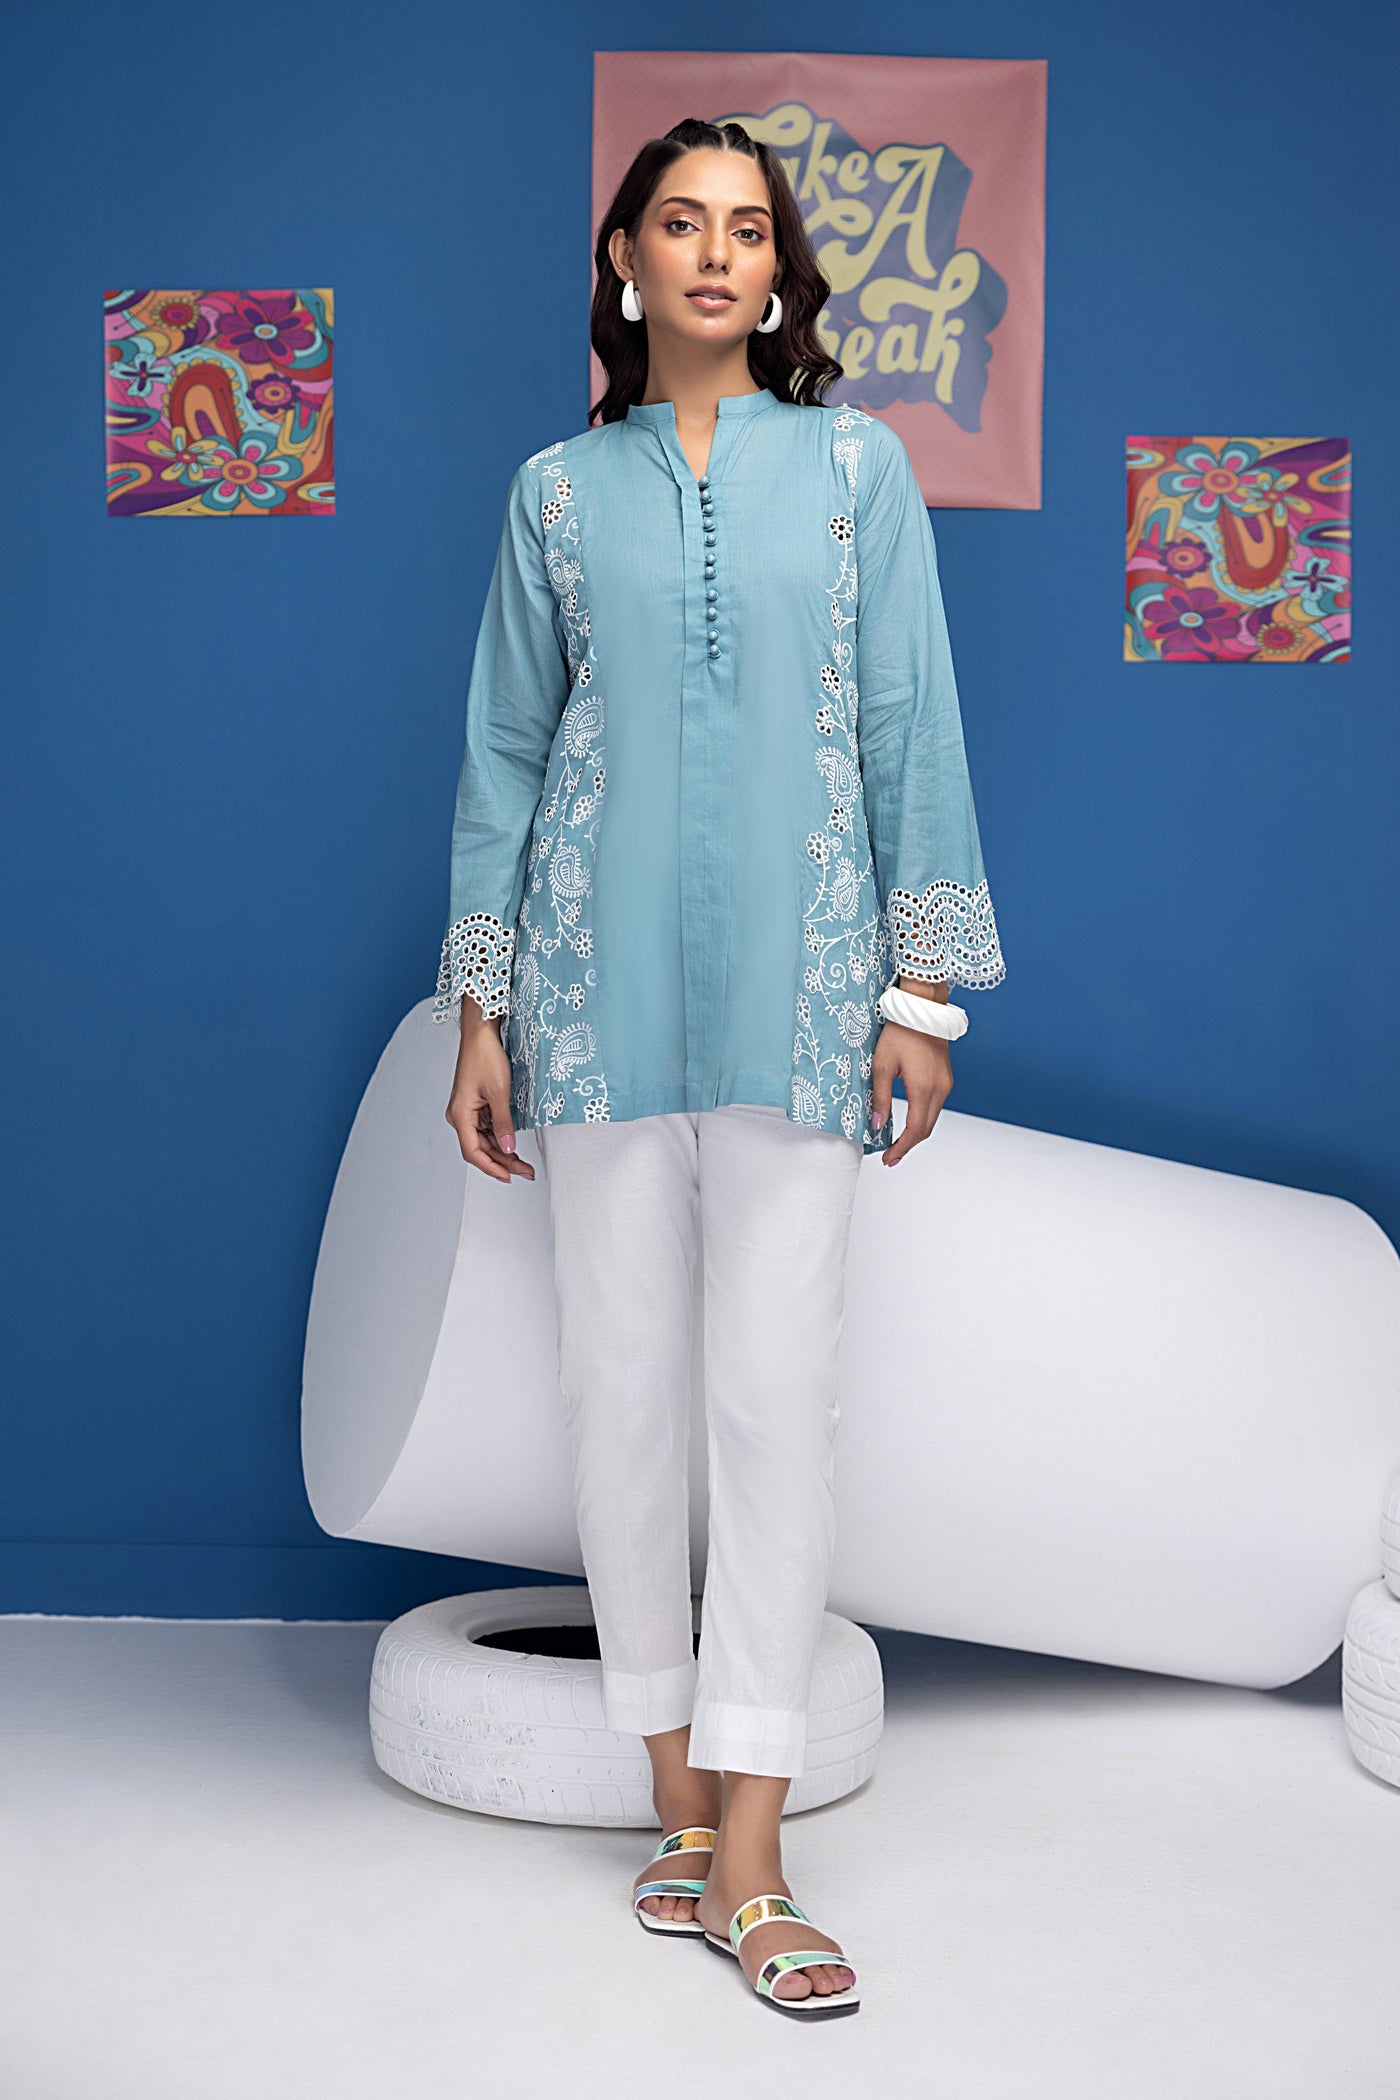 Lakhany 01 Piece Ready to Wear Embroidered Shirt - LG-SR-1024